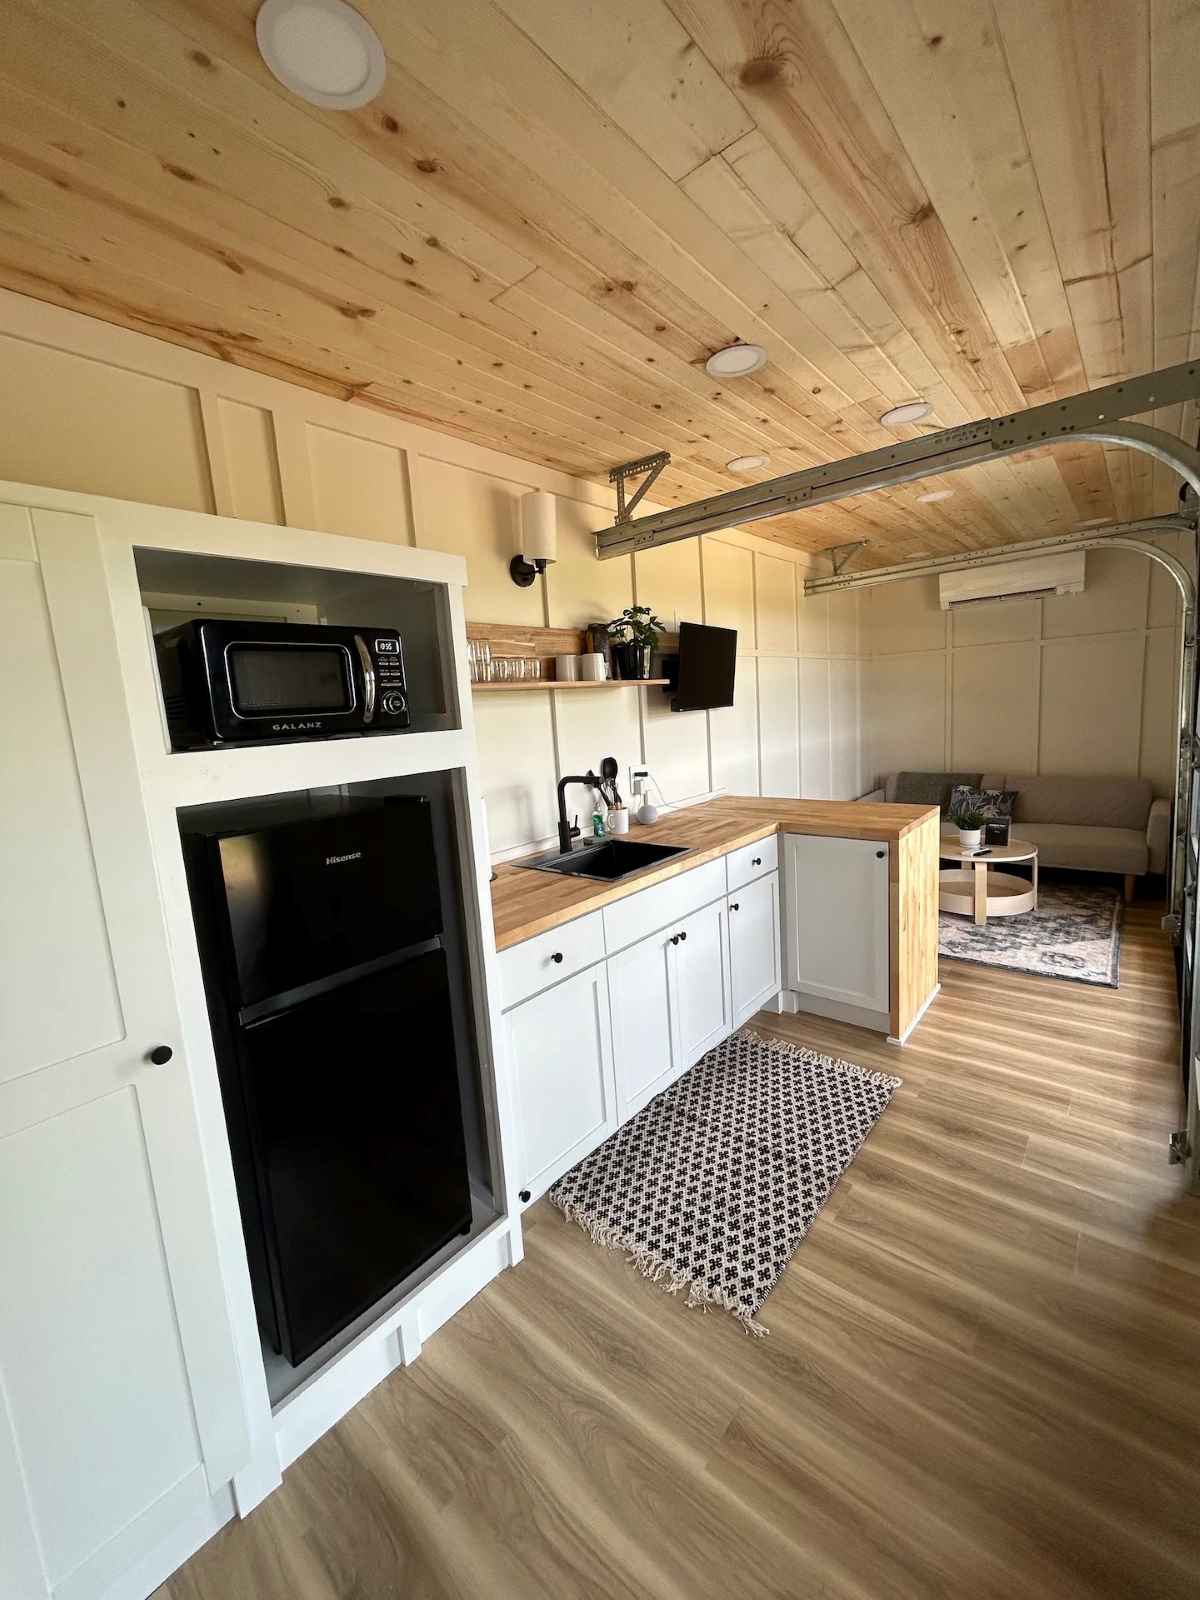 Kitchen of 40 feet shipping container home in Sugarcreek, Ohio, United States